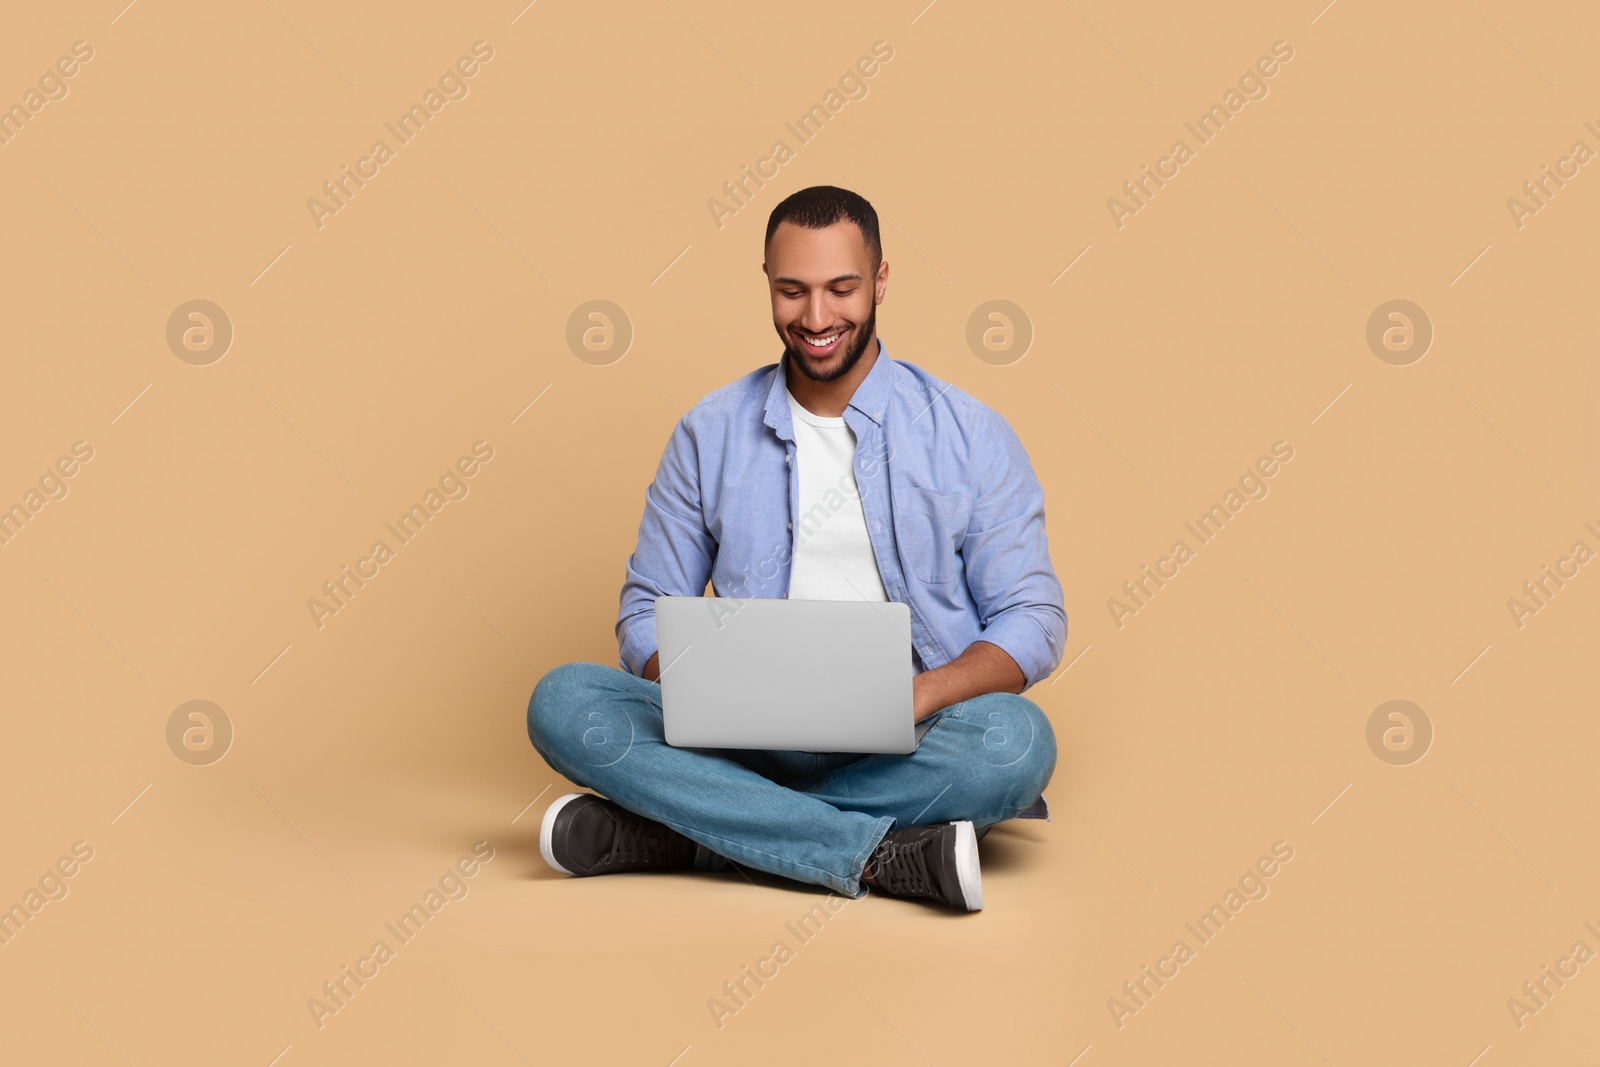 Photo of Smiling young man working with laptop on beige background